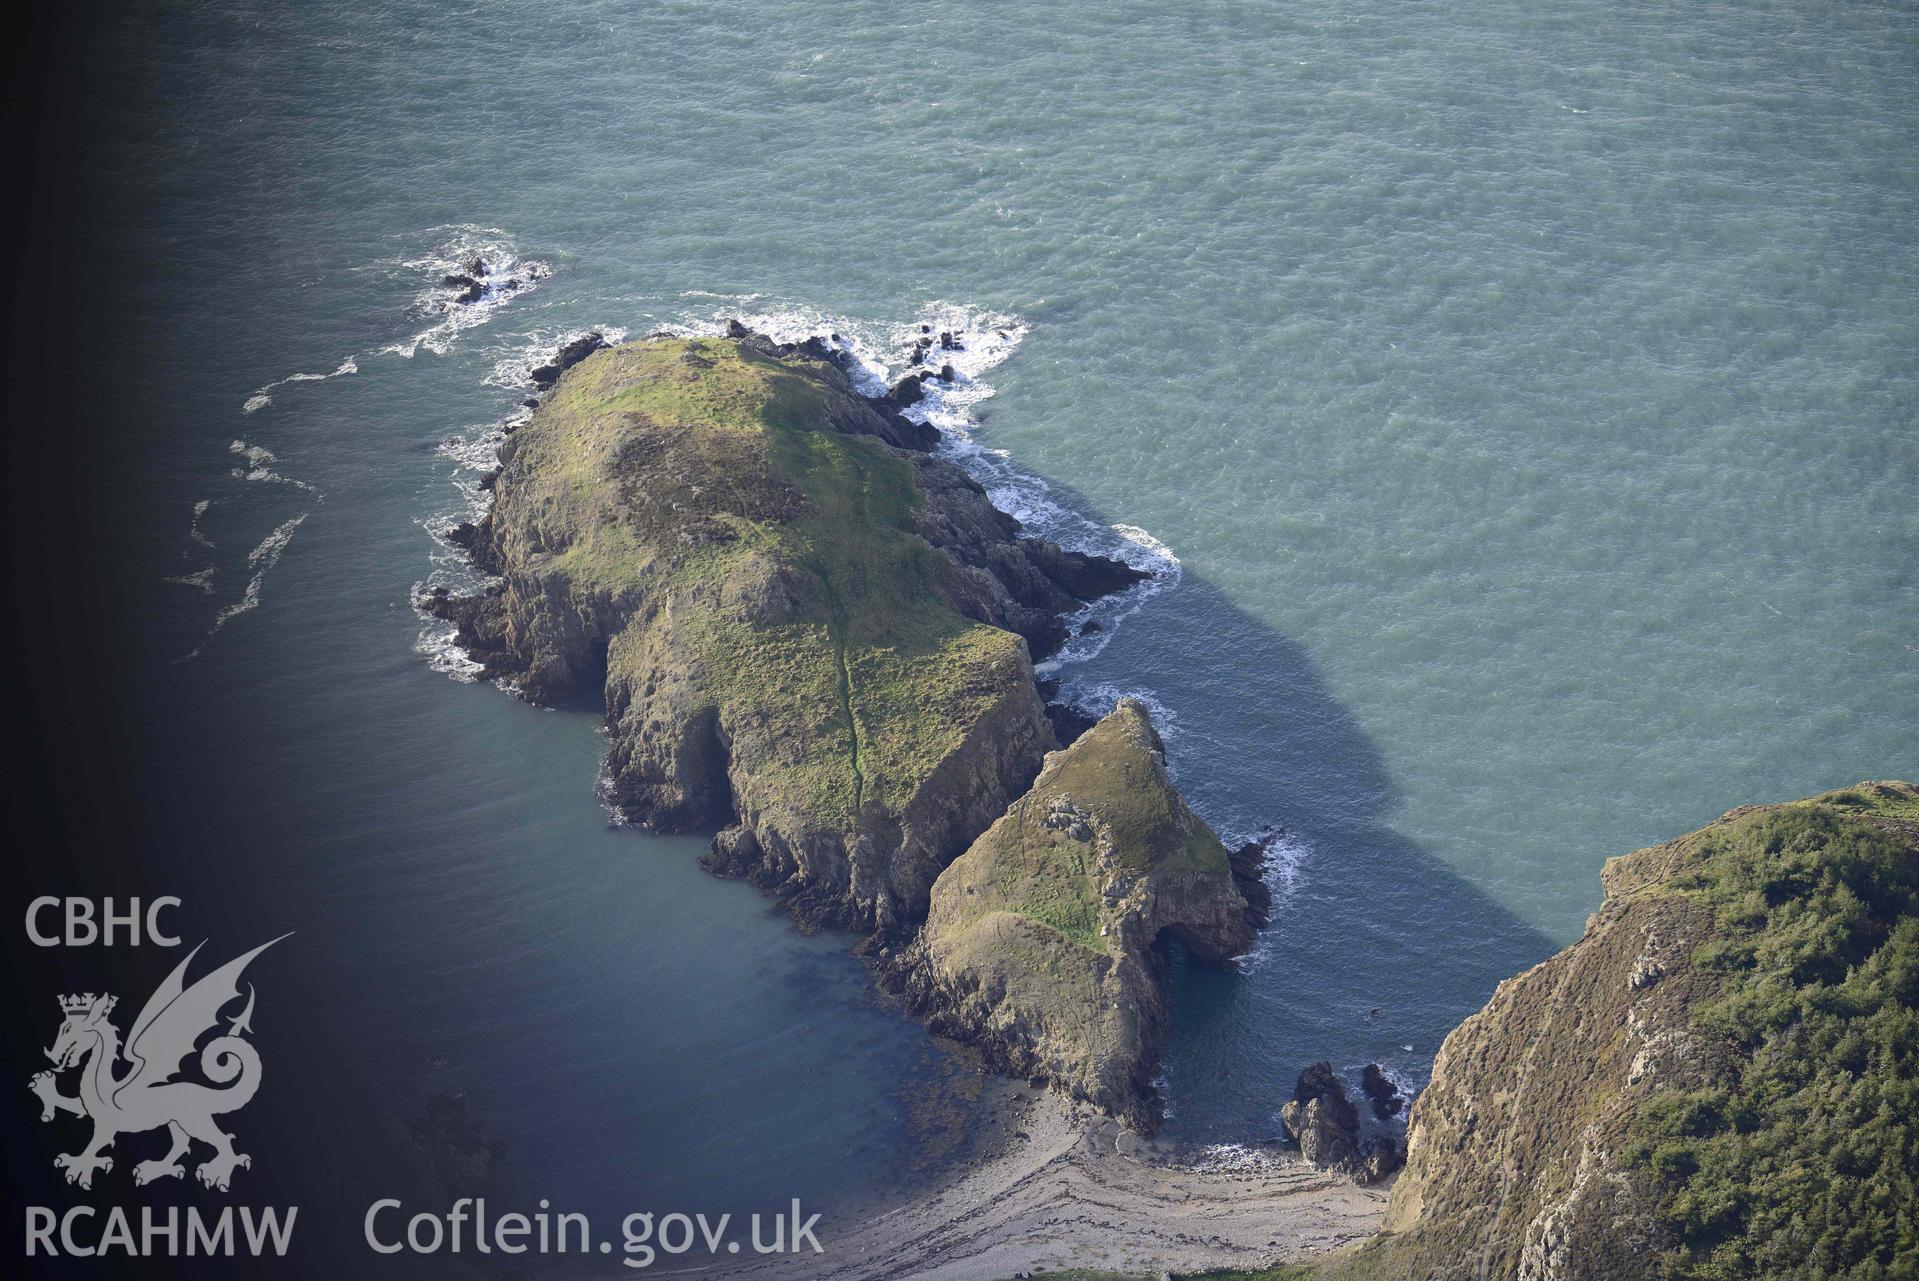 Aerial shot of Carmel Head, showing promontory fort and associated sites. Taken by Toby Driver. Produced with EU funds through the Ireland Wales Co-operation Programme 2014-2023. All material made freely available through the Open Government Licence.